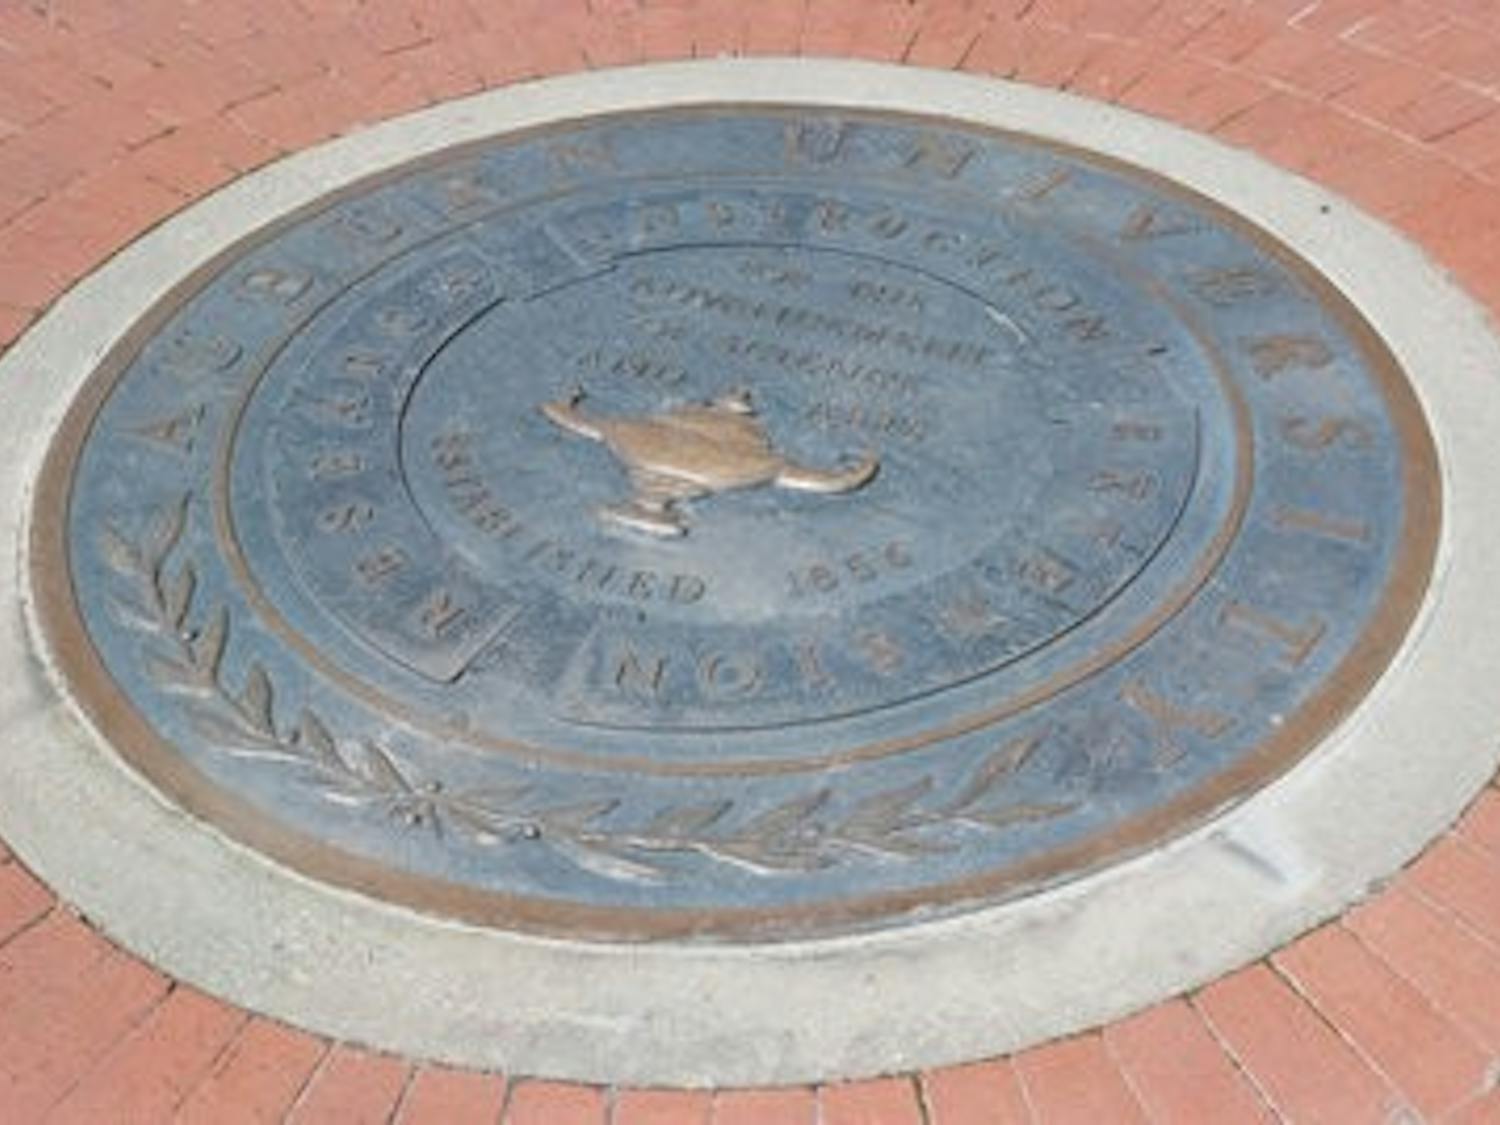 One of Auburn's oldest myths is centered on the seal in front of Langdon Hall.